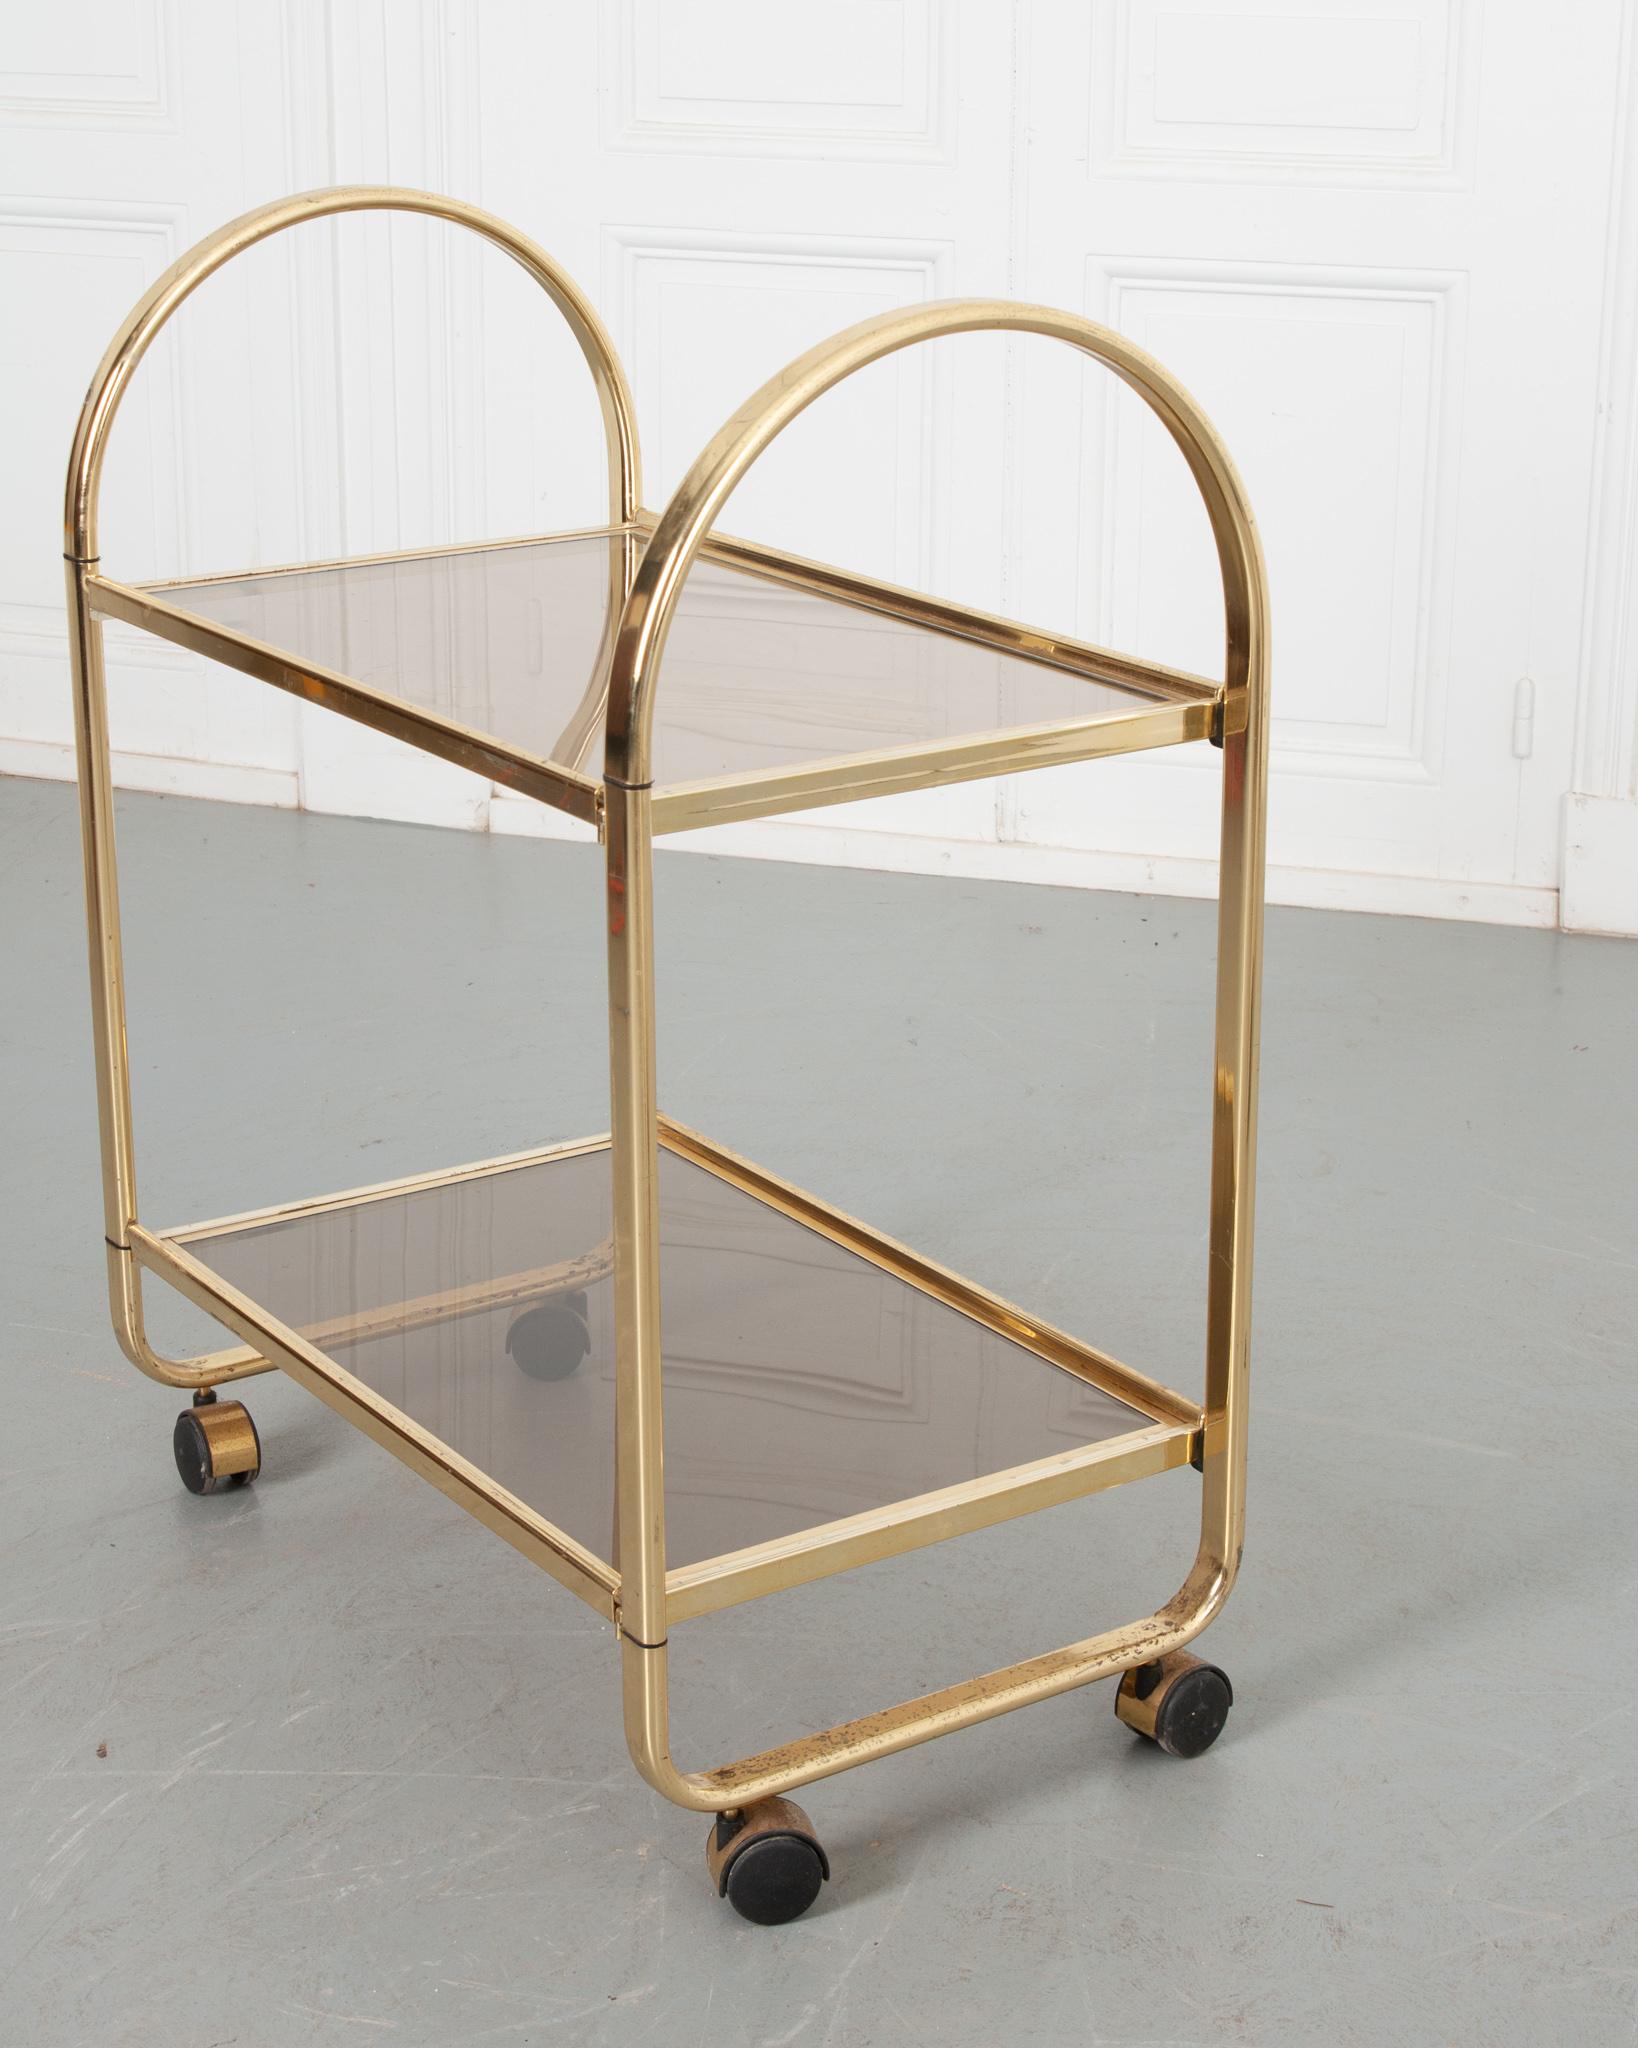 A charming petite bar cart crafted in Italy. The sleek metal frame retains a great luster that compliments the design. Two tinted glass shelves look wonderful from the side profile, are inset into the metal for a seamless look. Elevated on